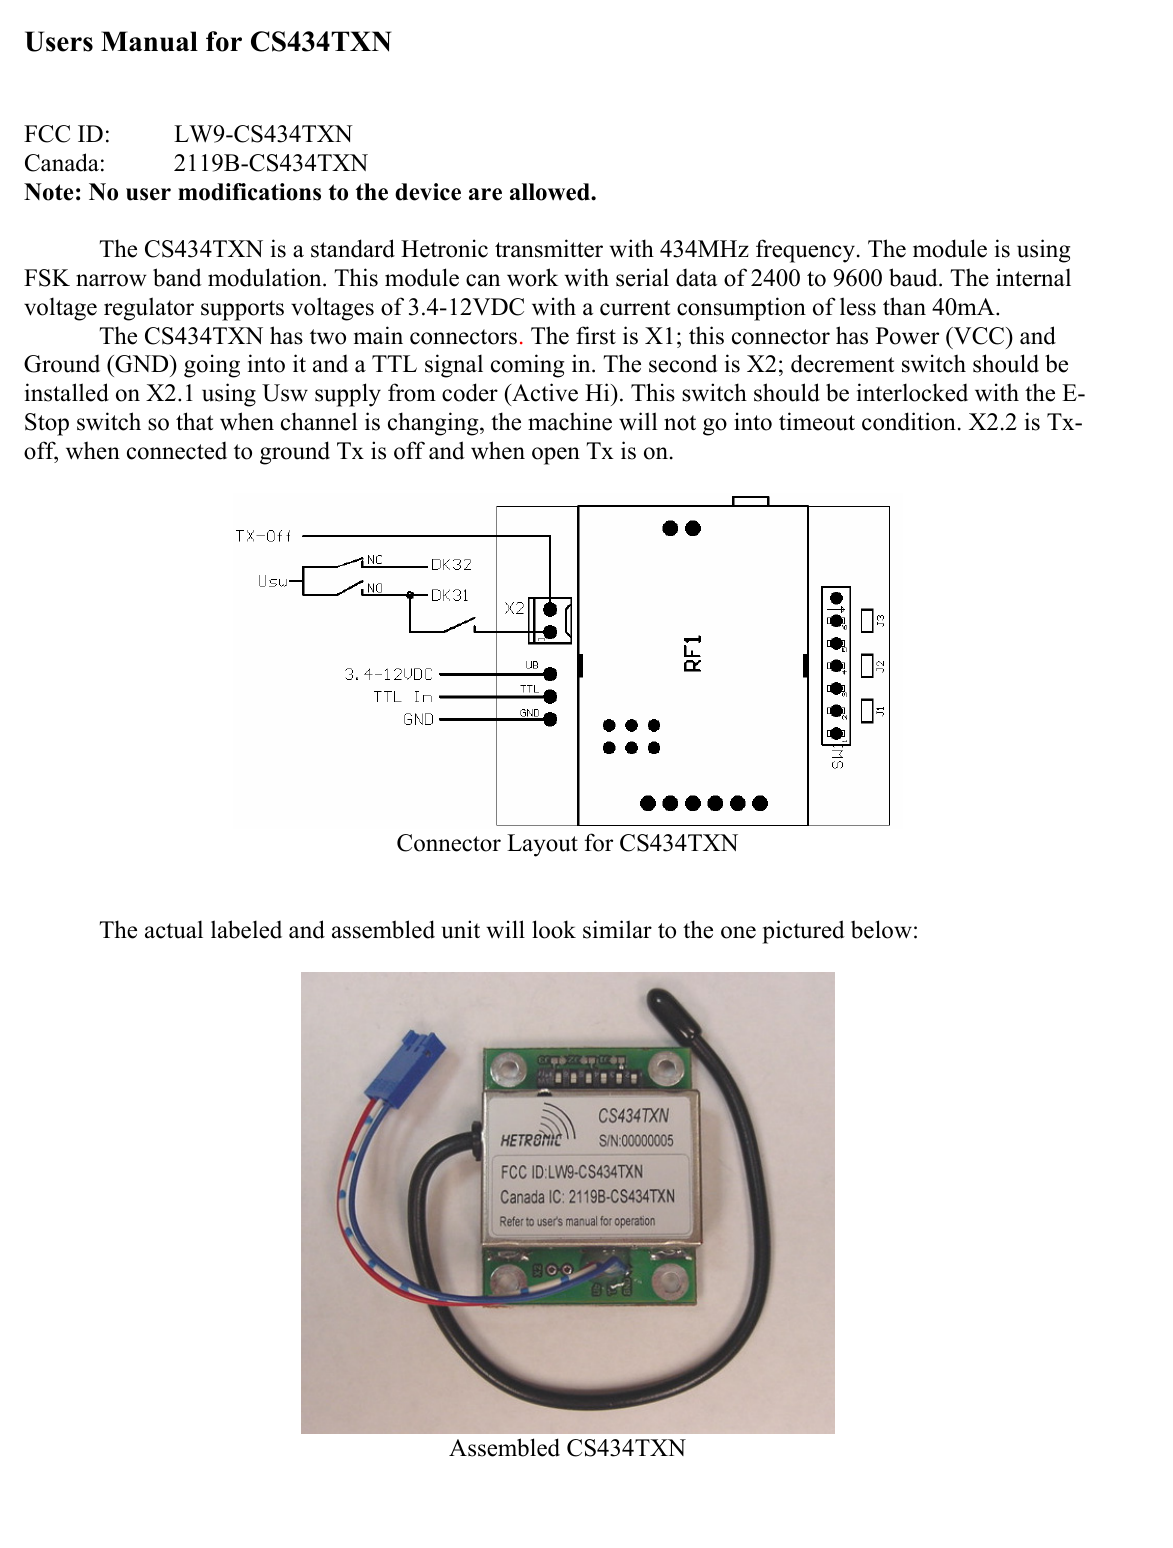 Users Manual for CS434TXN   FCC ID:  LW9-CS434TXN Canada:   2119B-CS434TXN Note: No user modifications to the device are allowed.  The CS434TXN is a standard Hetronic transmitter with 434MHz frequency. The module is using FSK narrow band modulation. This module can work with serial data of 2400 to 9600 baud. The internal voltage regulator supports voltages of 3.4-12VDC with a current consumption of less than 40mA.   The CS434TXN has two main connectors. The first is X1; this connector has Power (VCC) and Ground (GND) going into it and a TTL signal coming in. The second is X2; decrement switch should be installed on X2.1 using Usw supply from coder (Active Hi). This switch should be interlocked with the E-Stop switch so that when channel is changing, the machine will not go into timeout condition. X2.2 is Tx-off, when connected to ground Tx is off and when open Tx is on.   Connector Layout for CS434TXN    The actual labeled and assembled unit will look similar to the one pictured below:   Assembled CS434TXN 